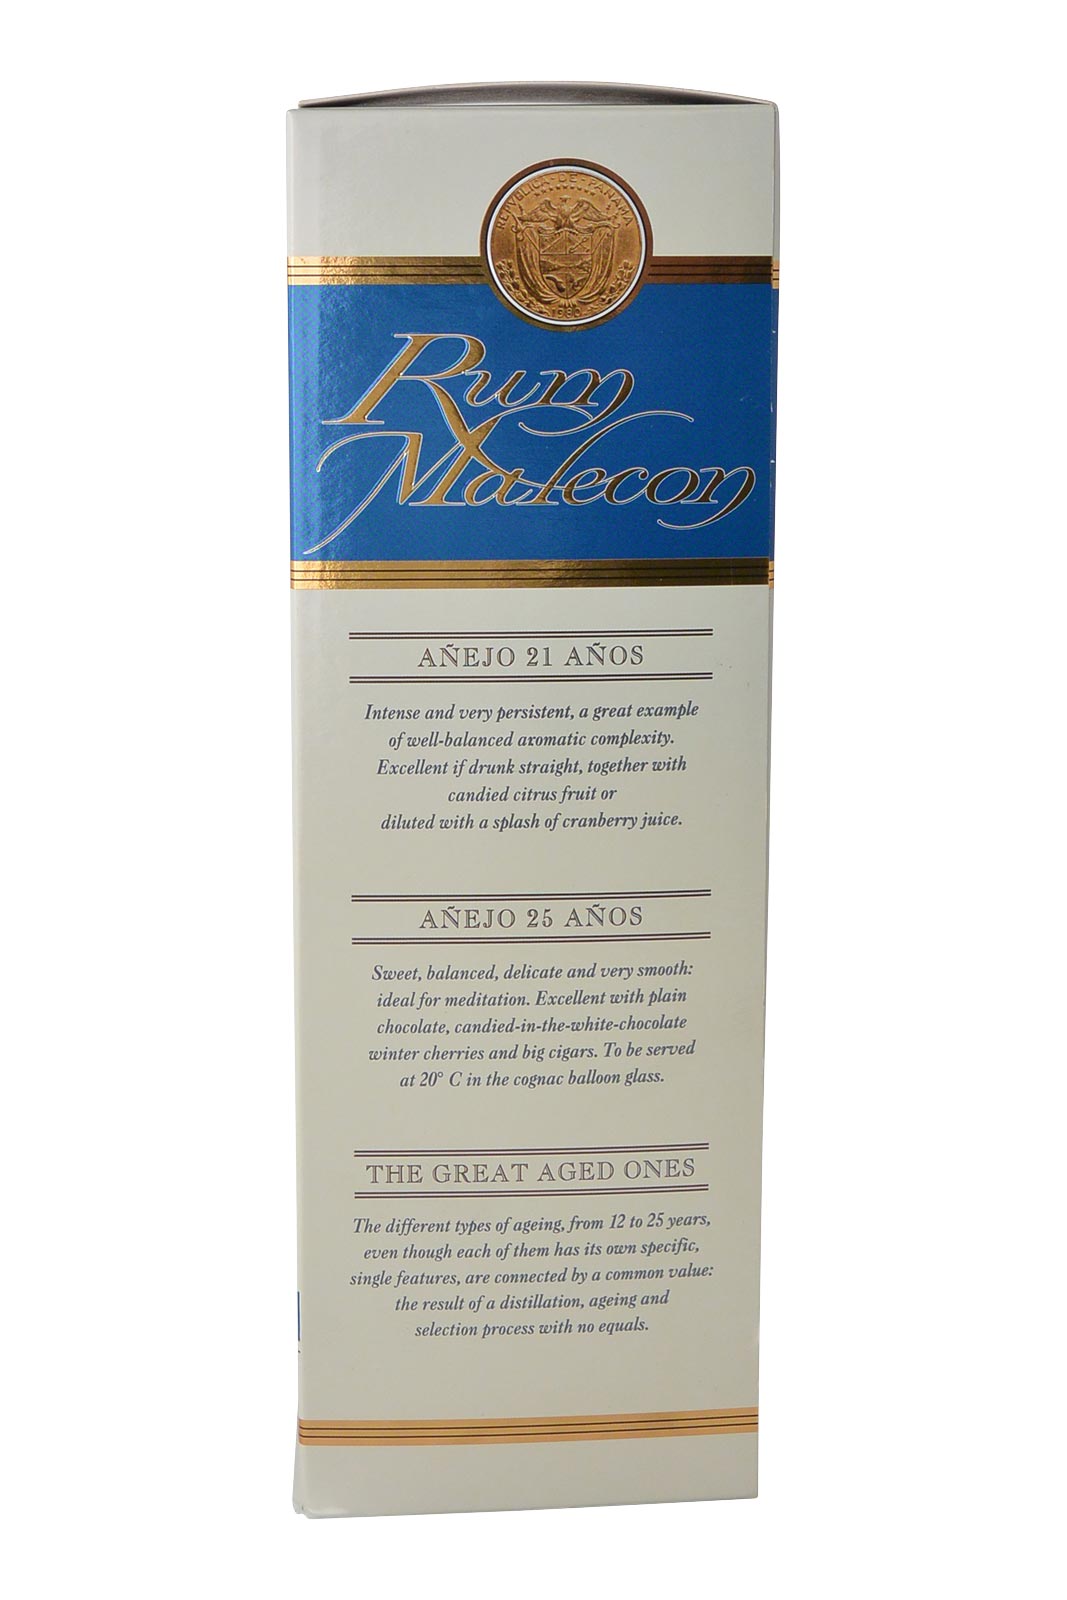 Rum Malecon Reserva Imperial 18 Year Old